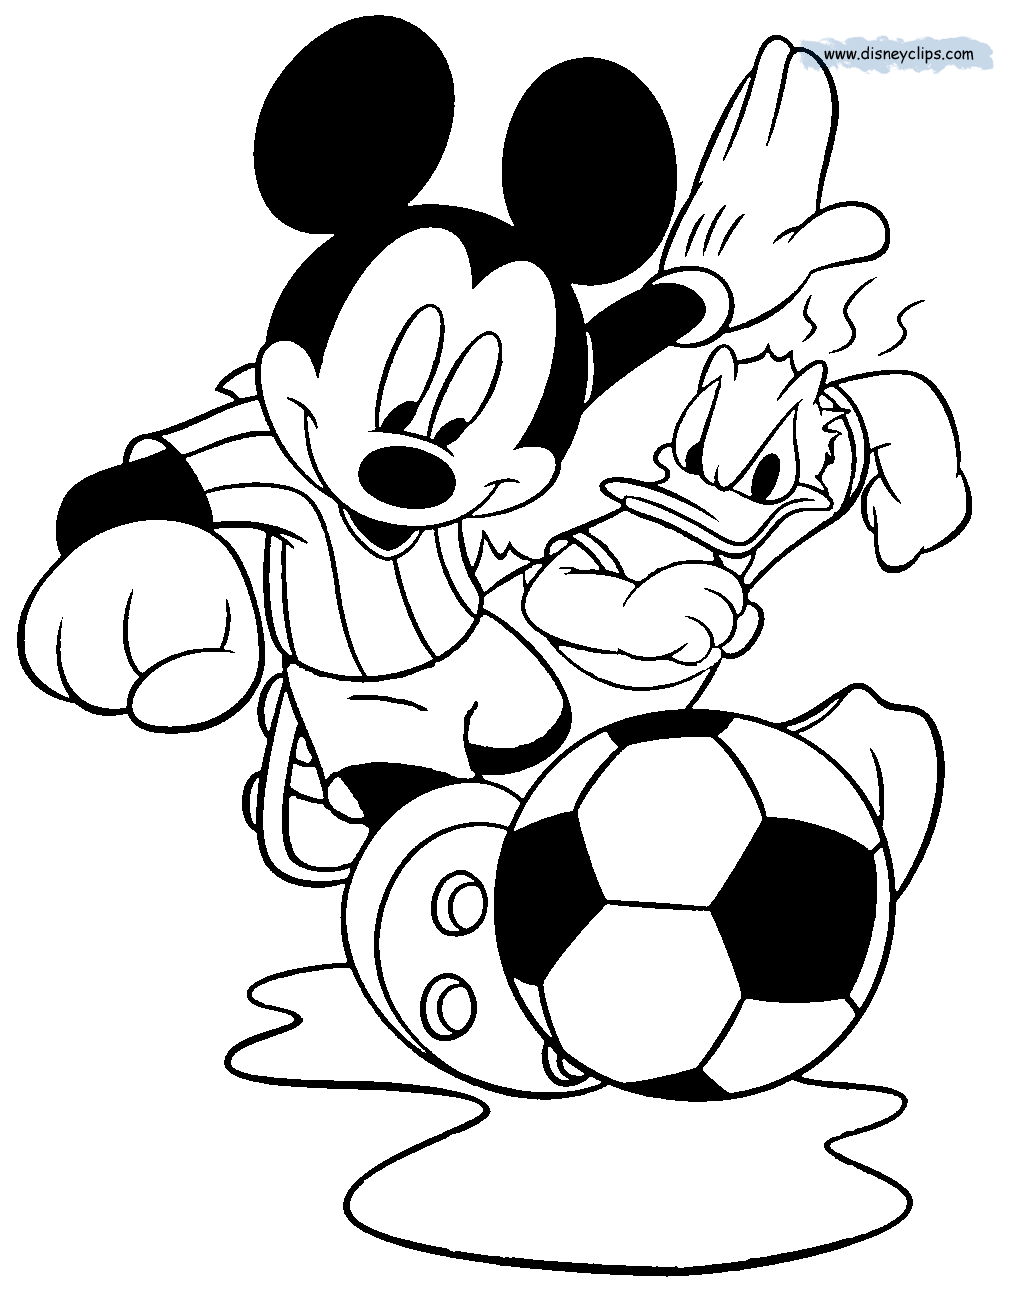 mickey and friends coloring pages mickey mouse and friends coloring pages and pages coloring mickey friends 